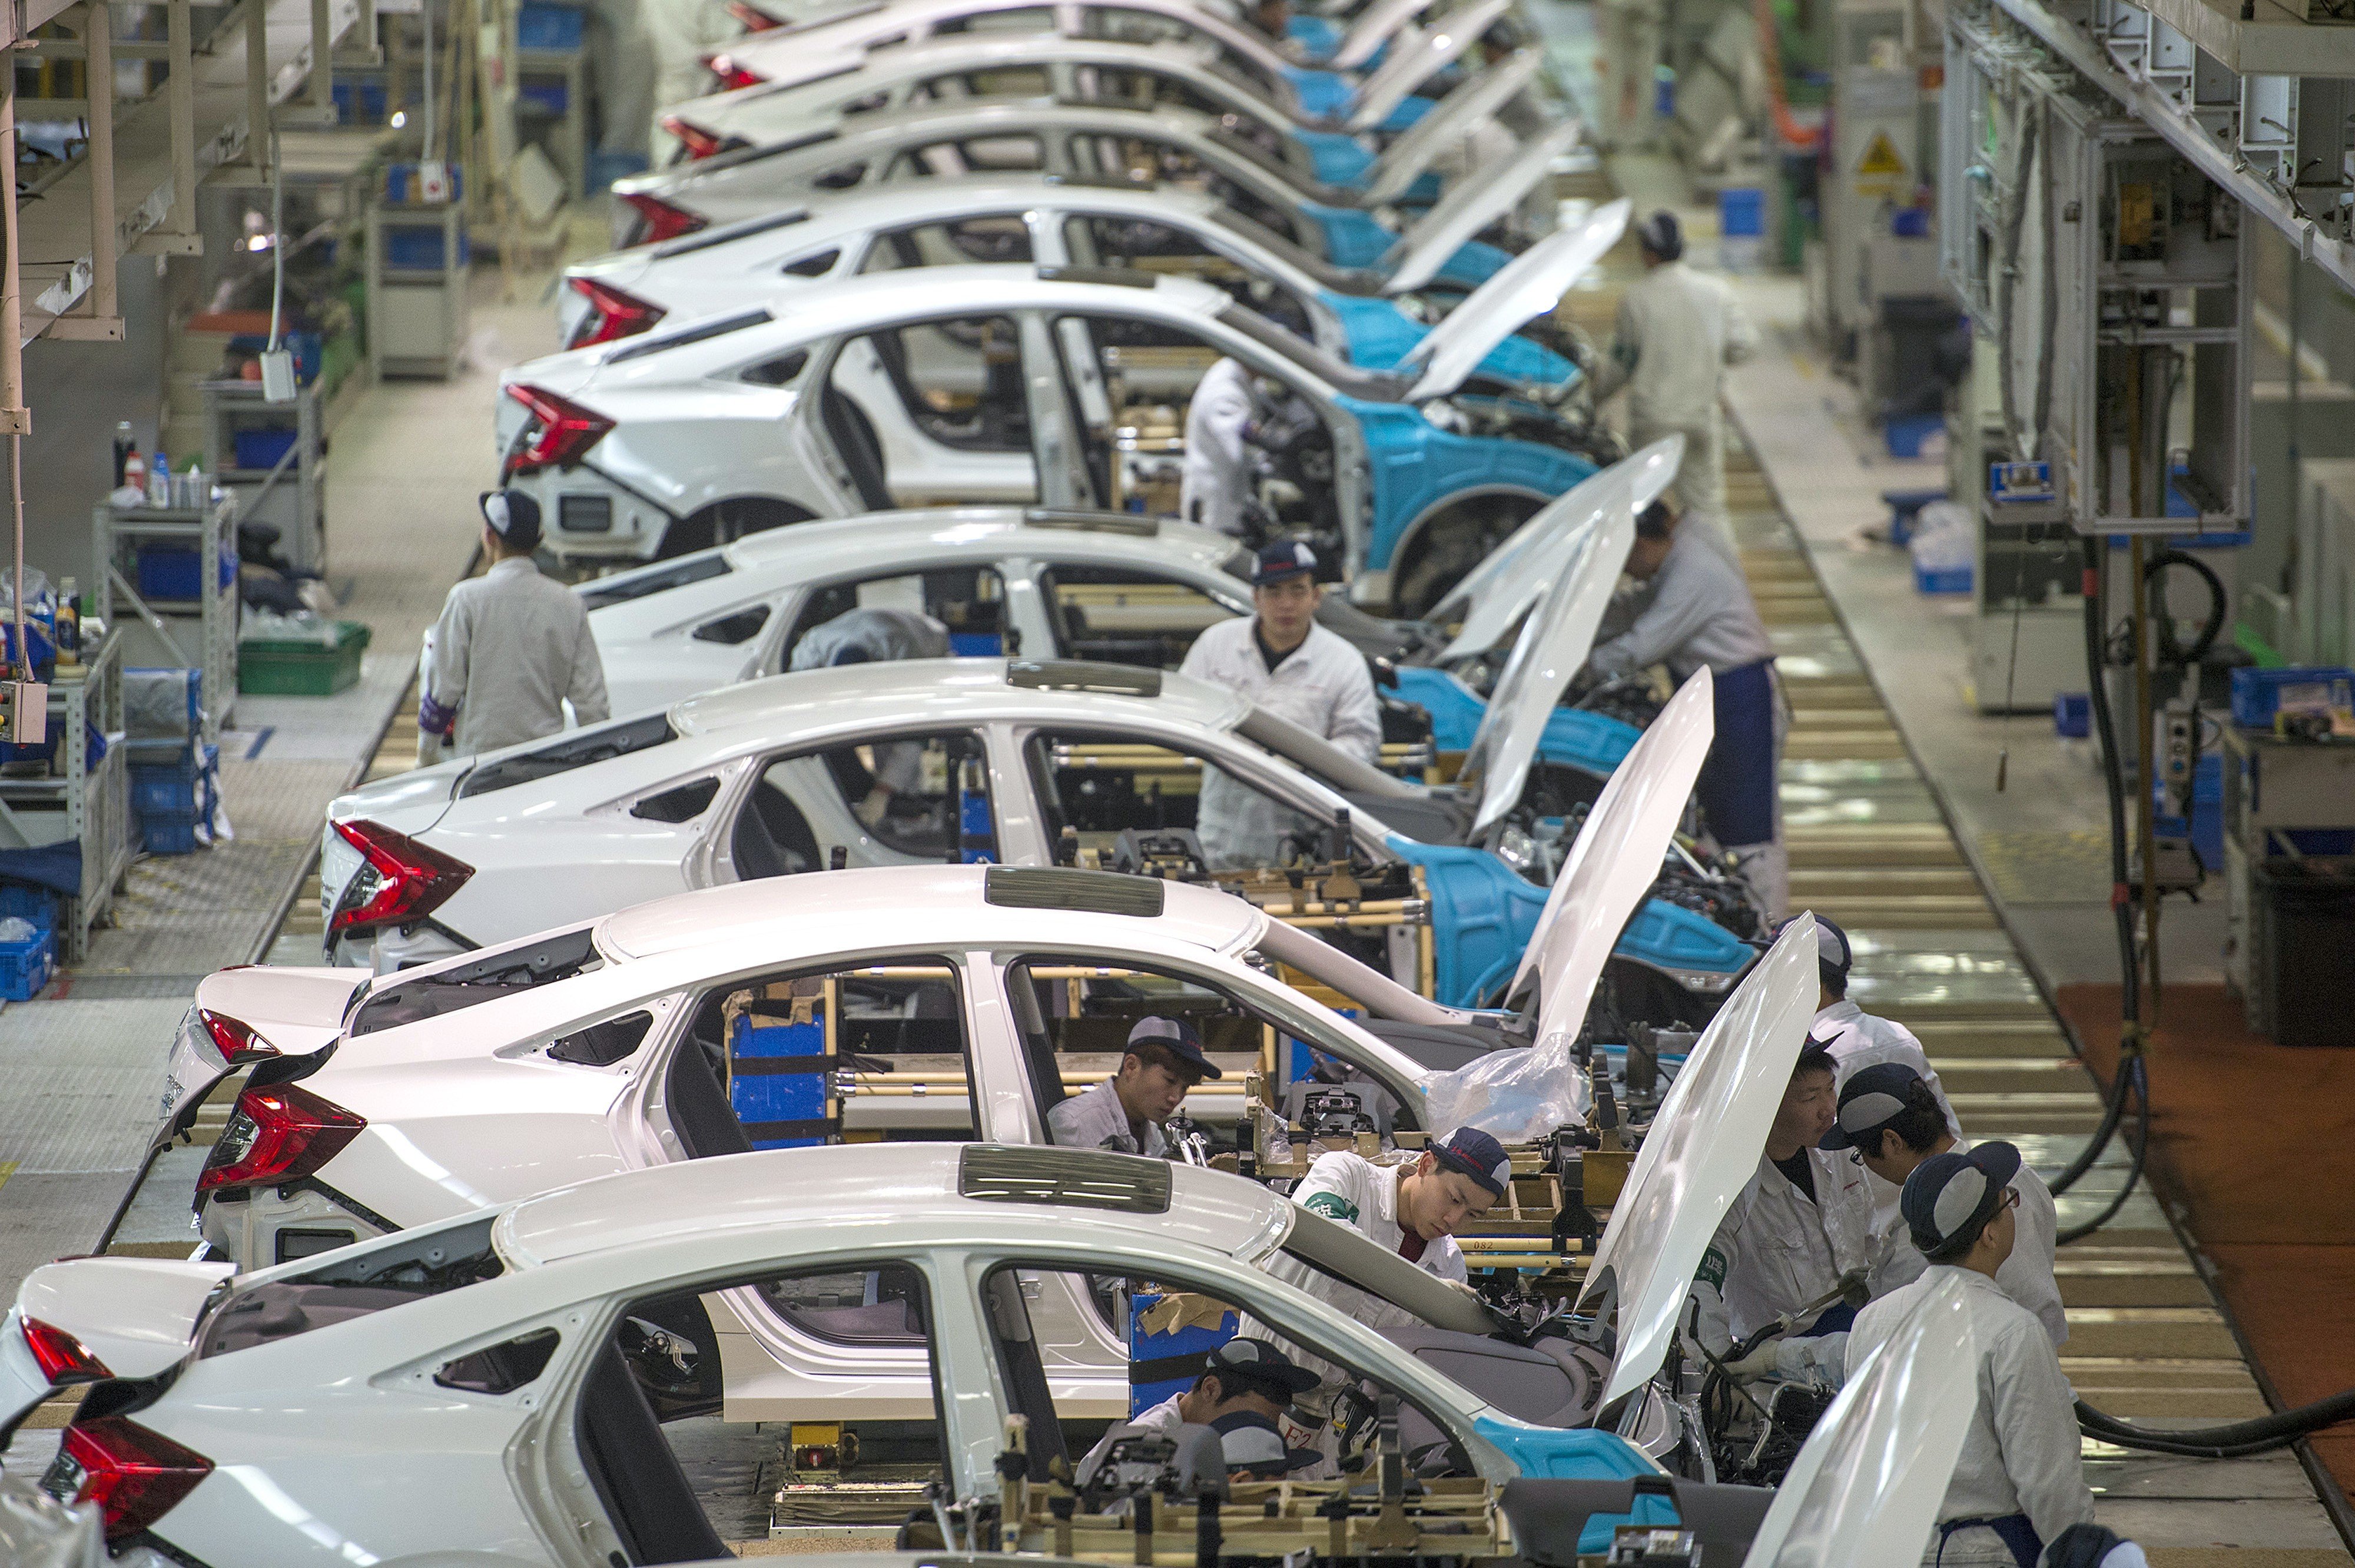 Workers assemble Honda Civics on an assembly line at a Dongfeng Honda automotive plant in Wuhan in central China's Hubei province. Photo: AP